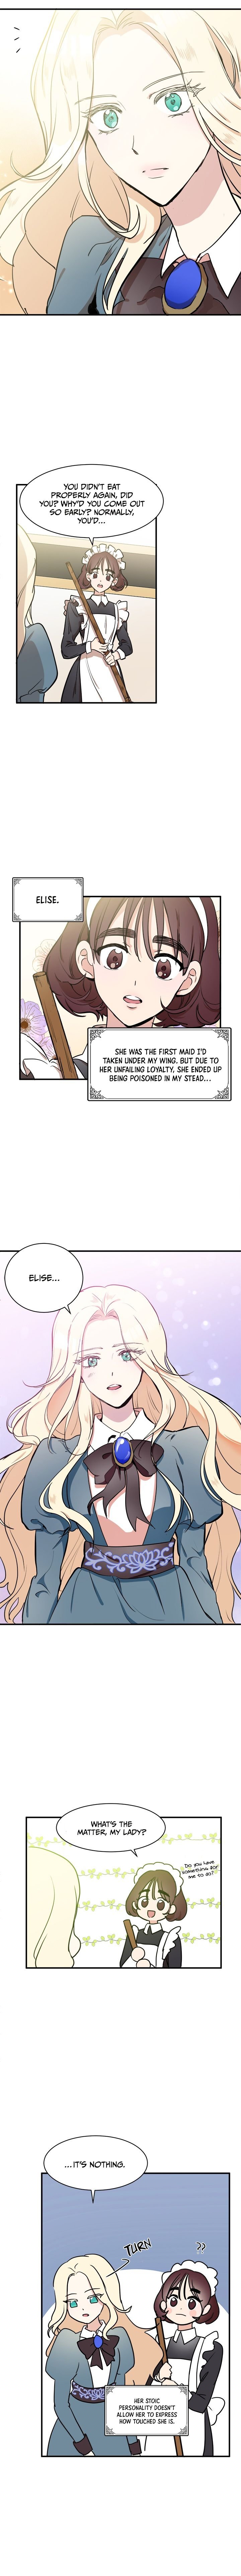 the-villainess-lives-twice-chap-4-5